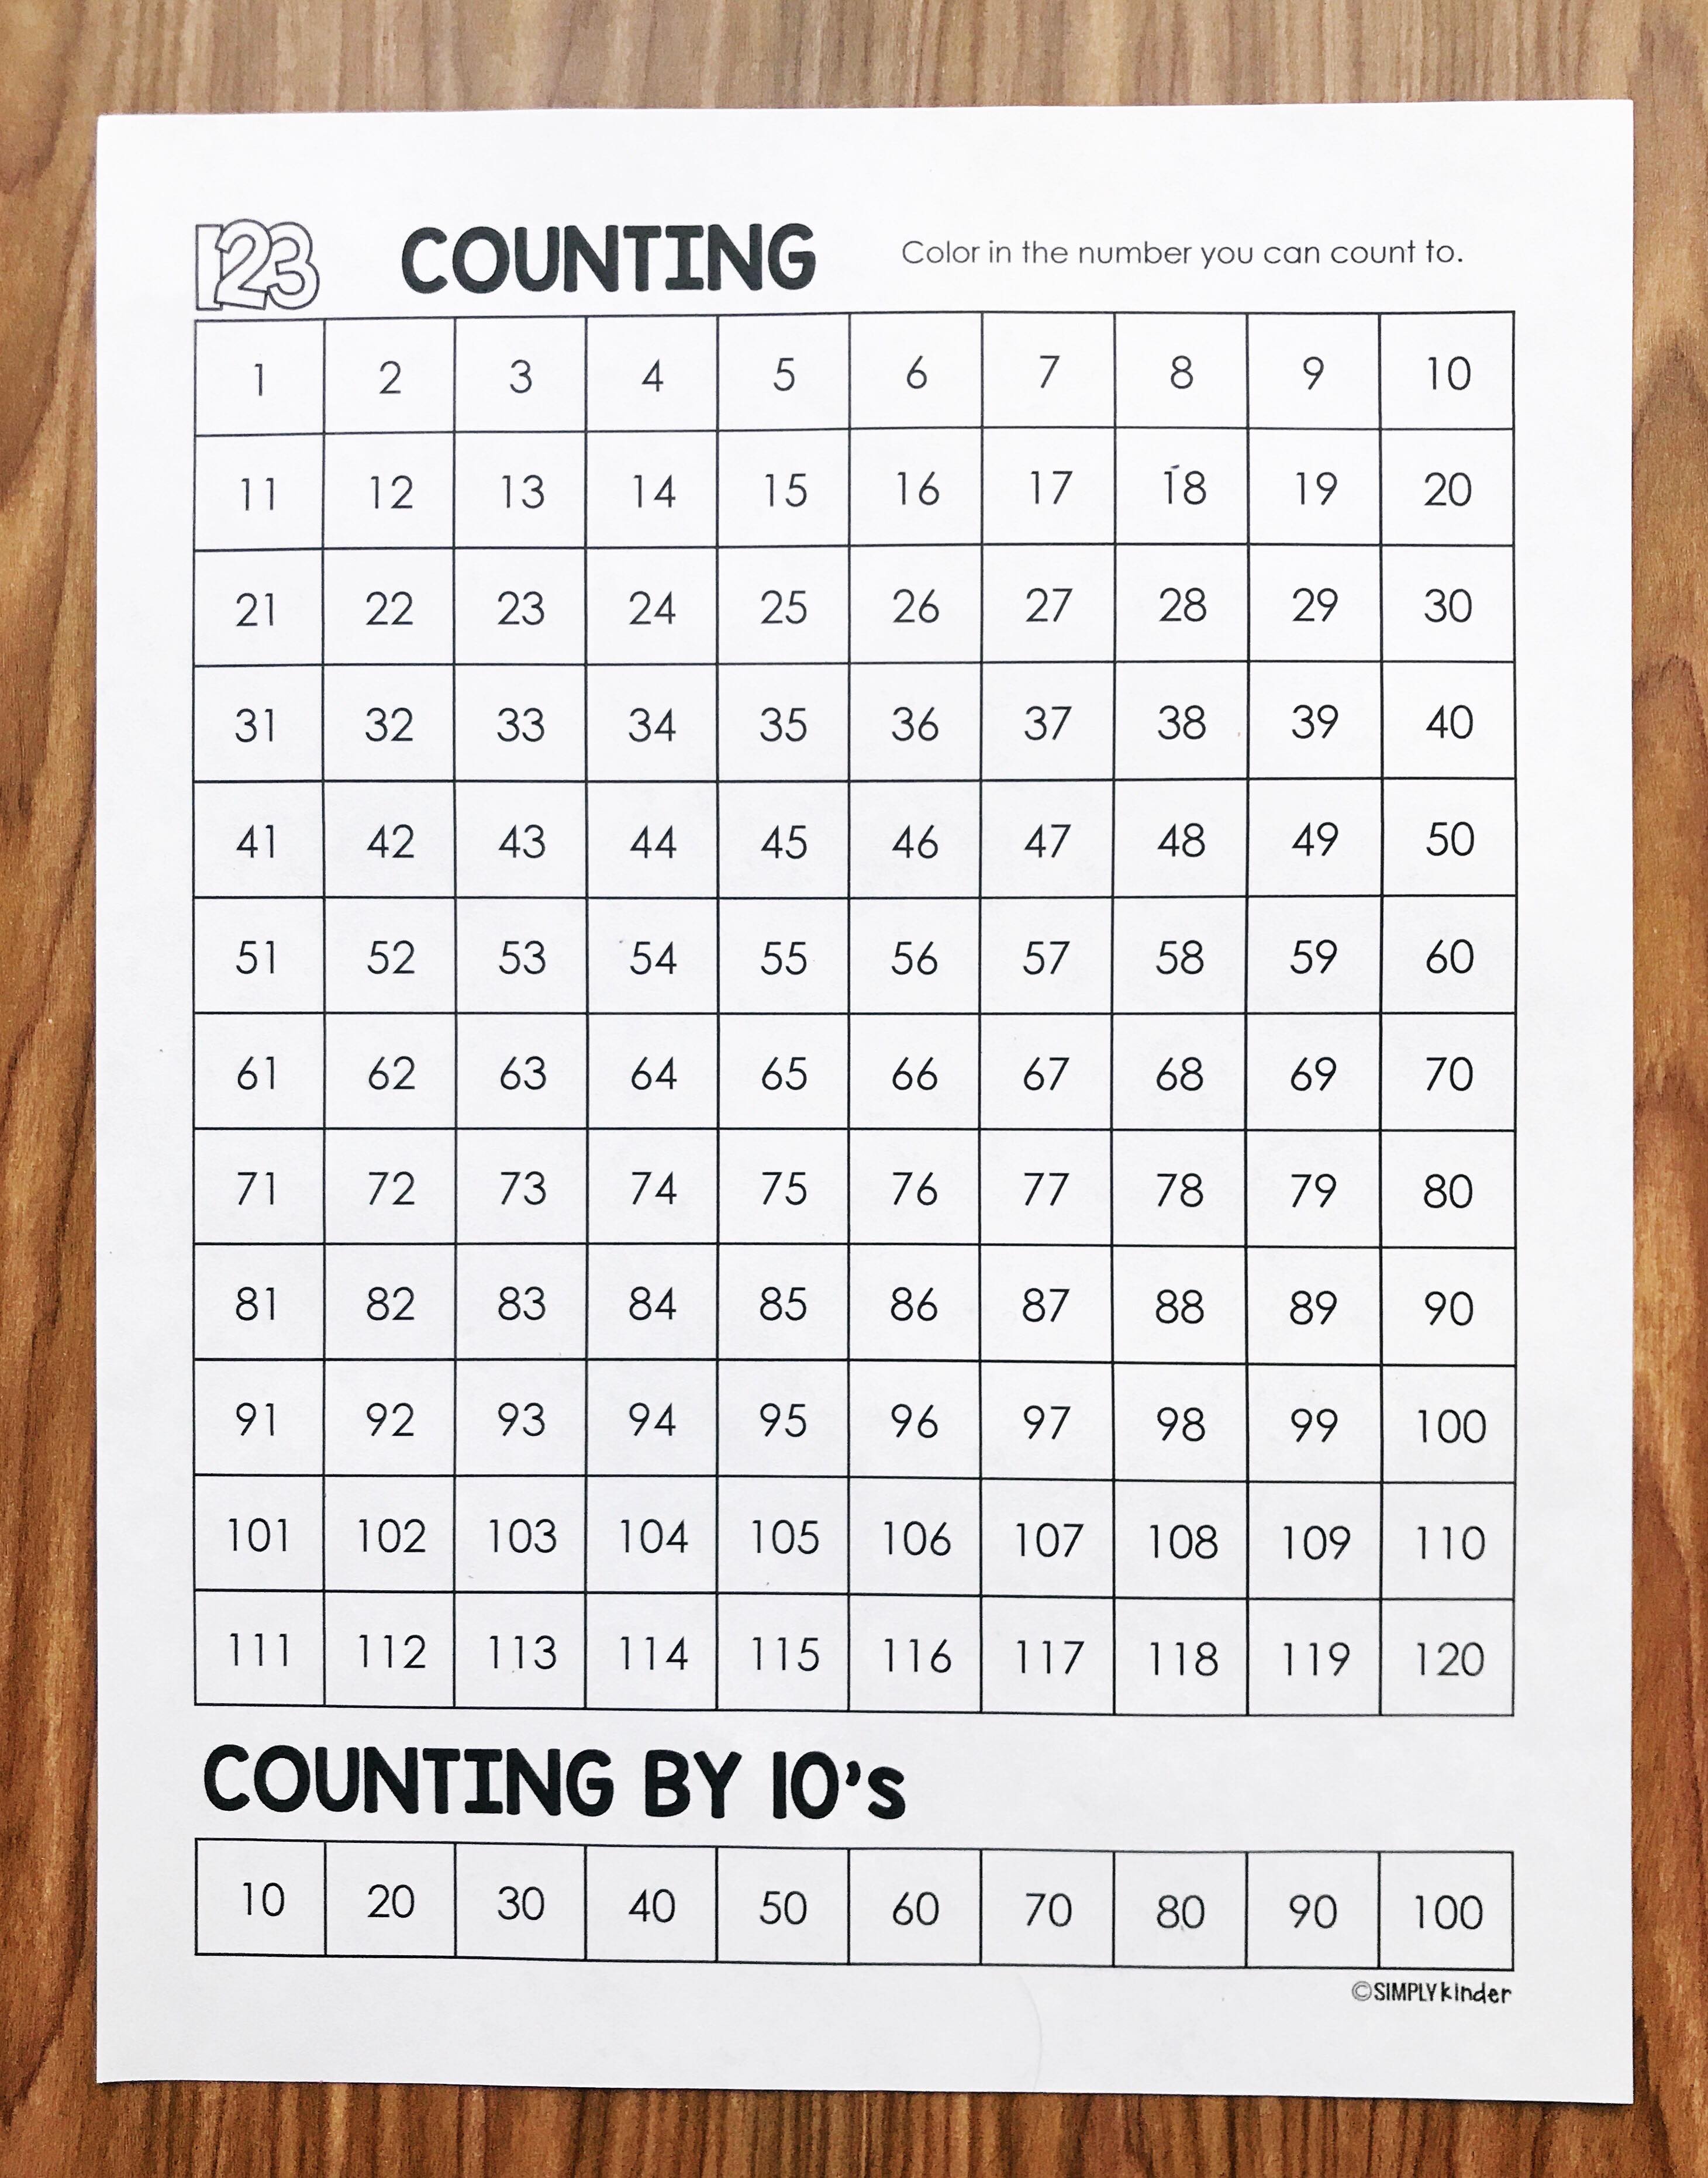 Help your students track how high they can count with this free student data book from Simply Kinder. 